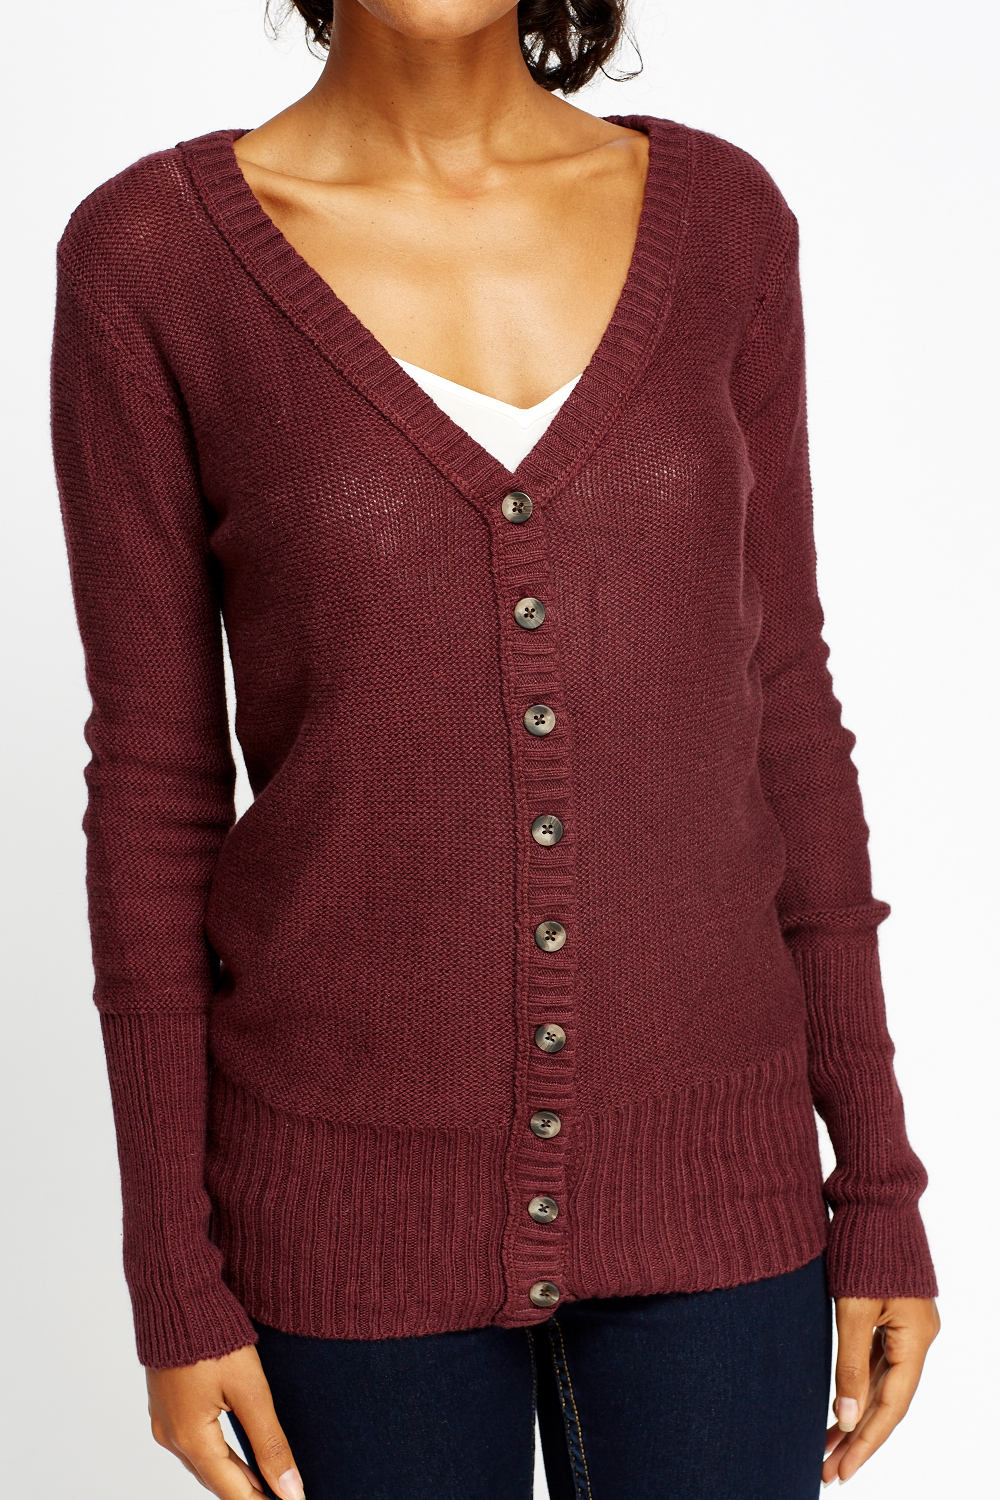 V-Neck Button Front Cardigan - Just $7